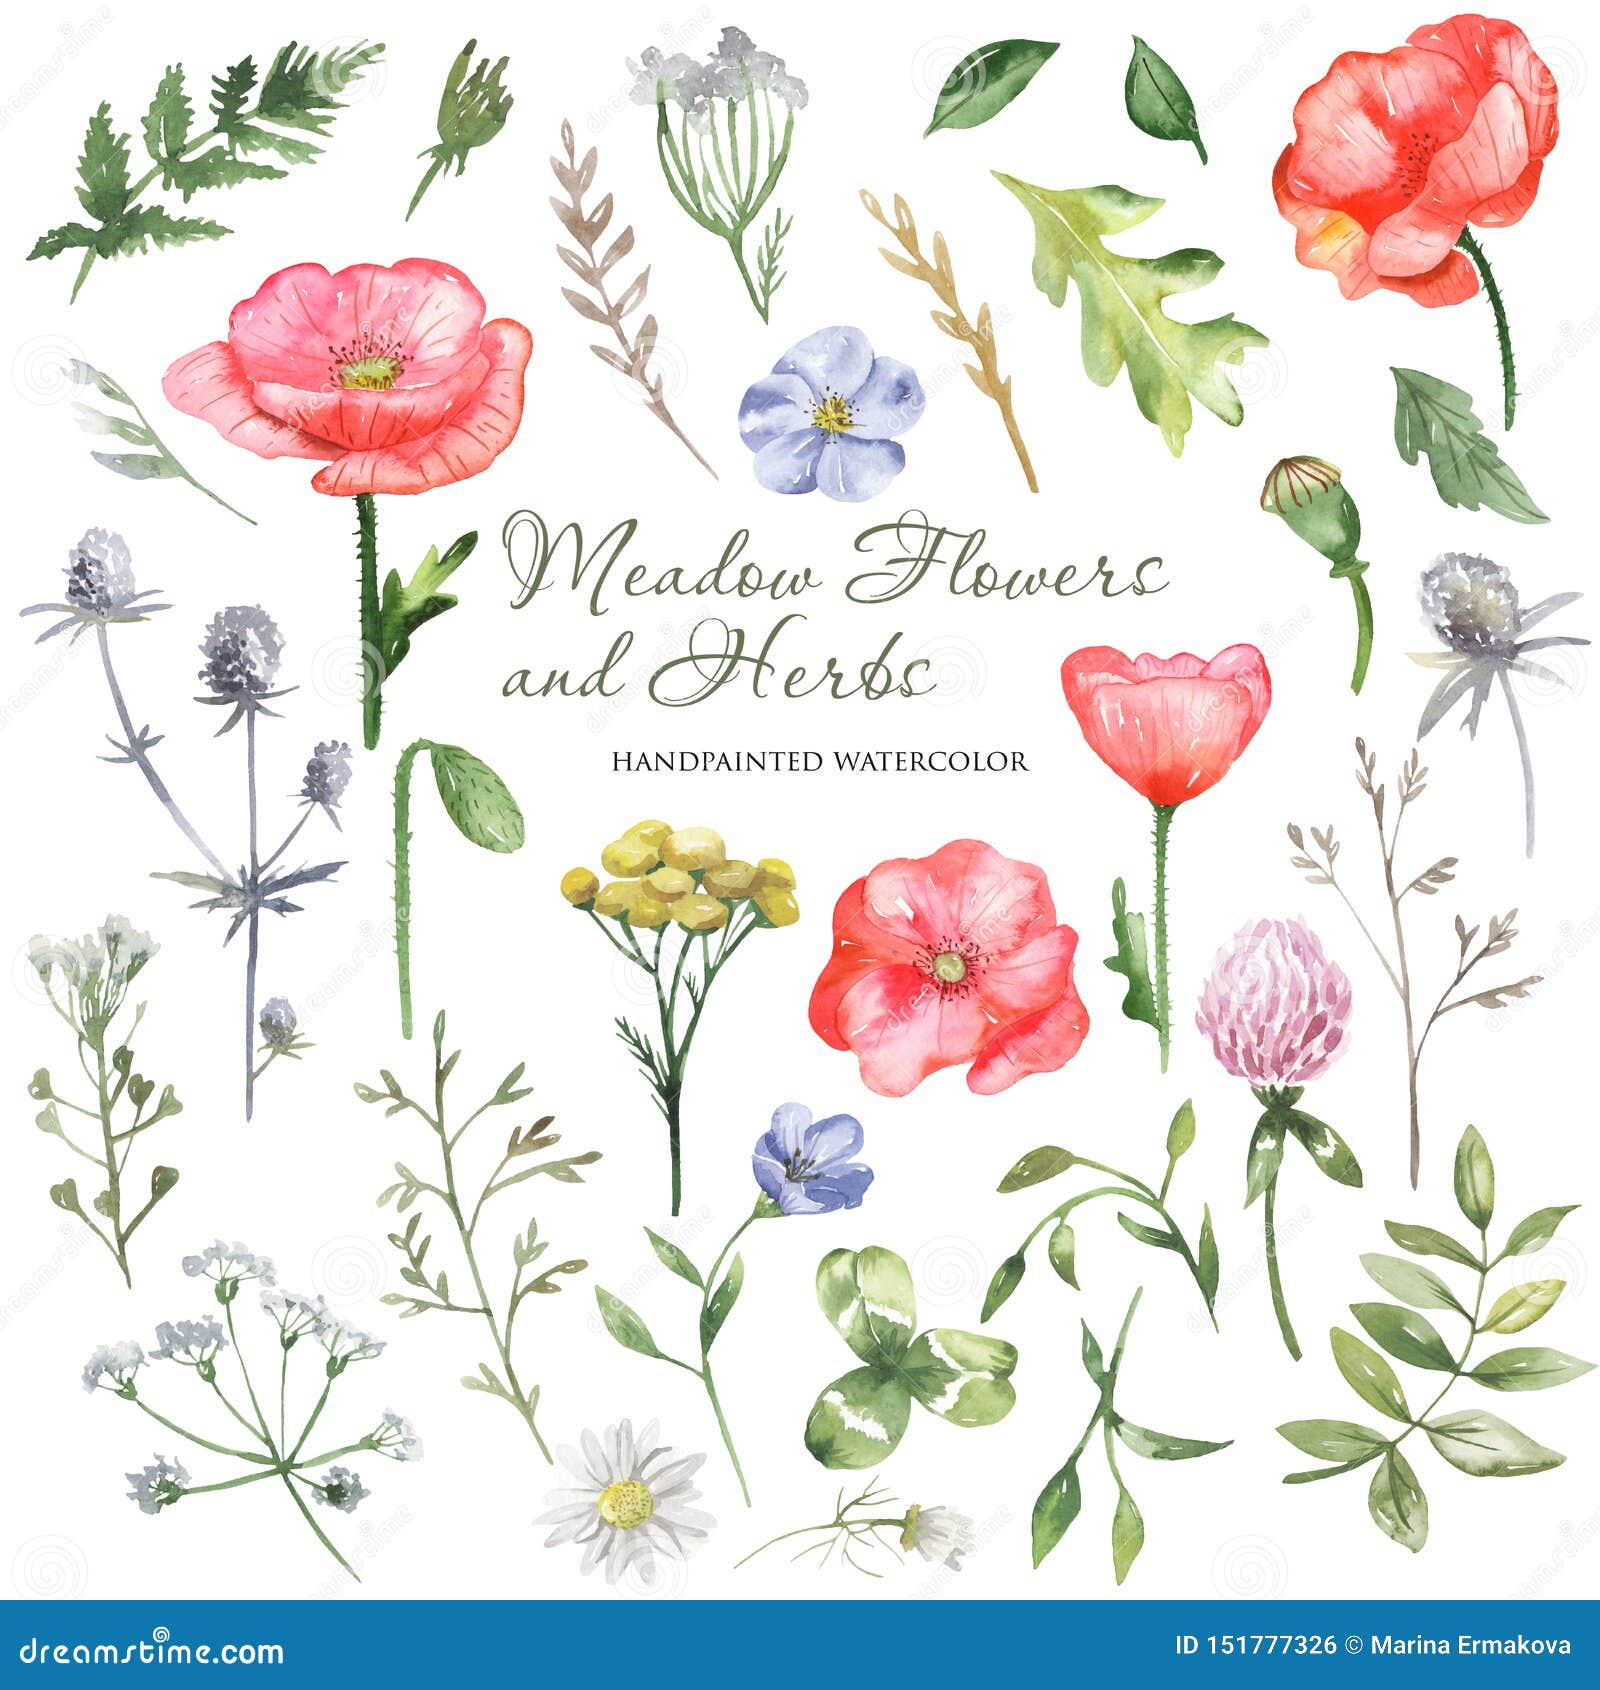 watercolor wildflowers, meadow flowers, herbs, plants. flower botanical set on a white background.